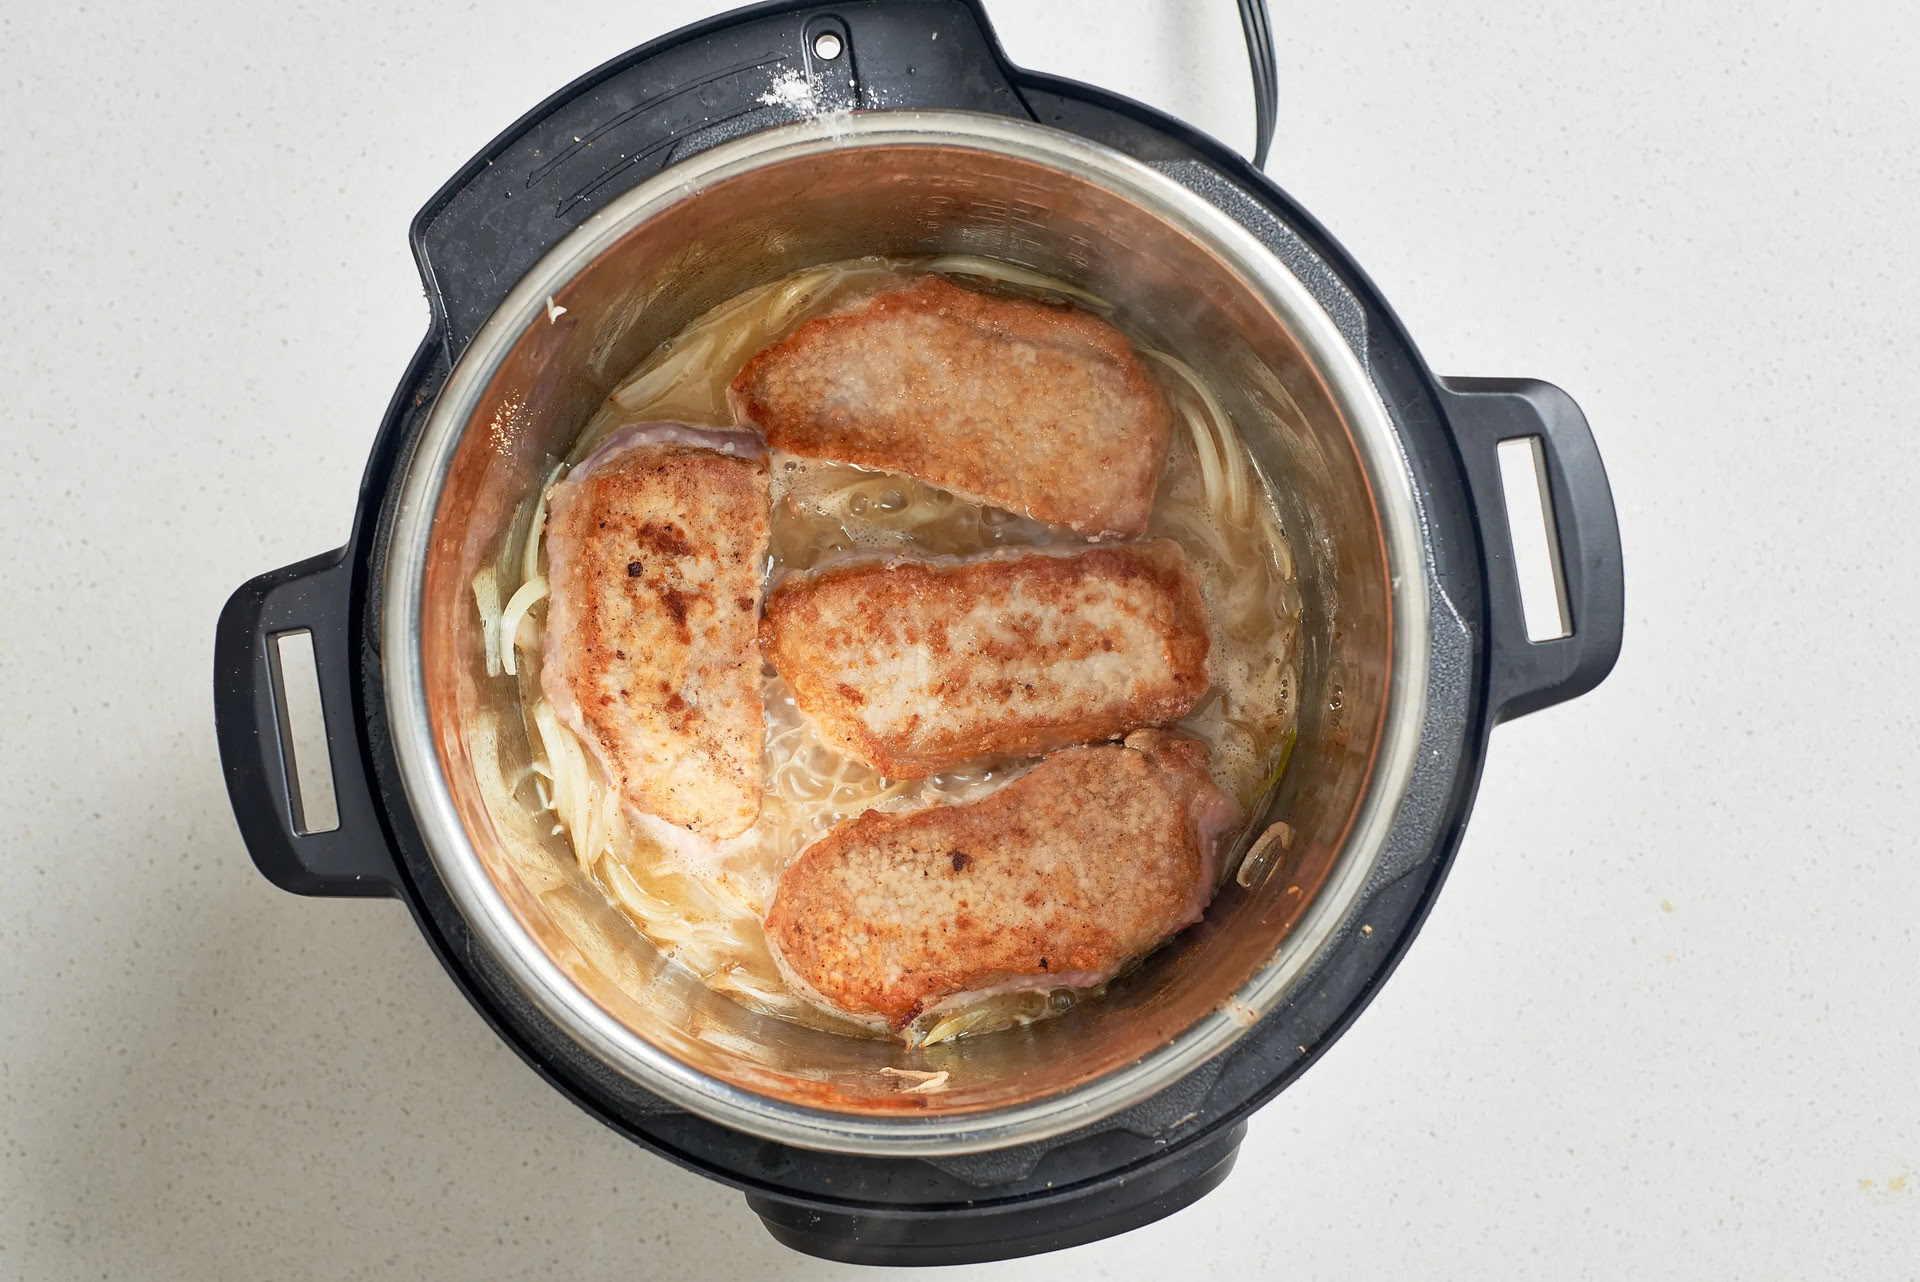 How To Cook Pork Chops In An Electric Pressure Cooker